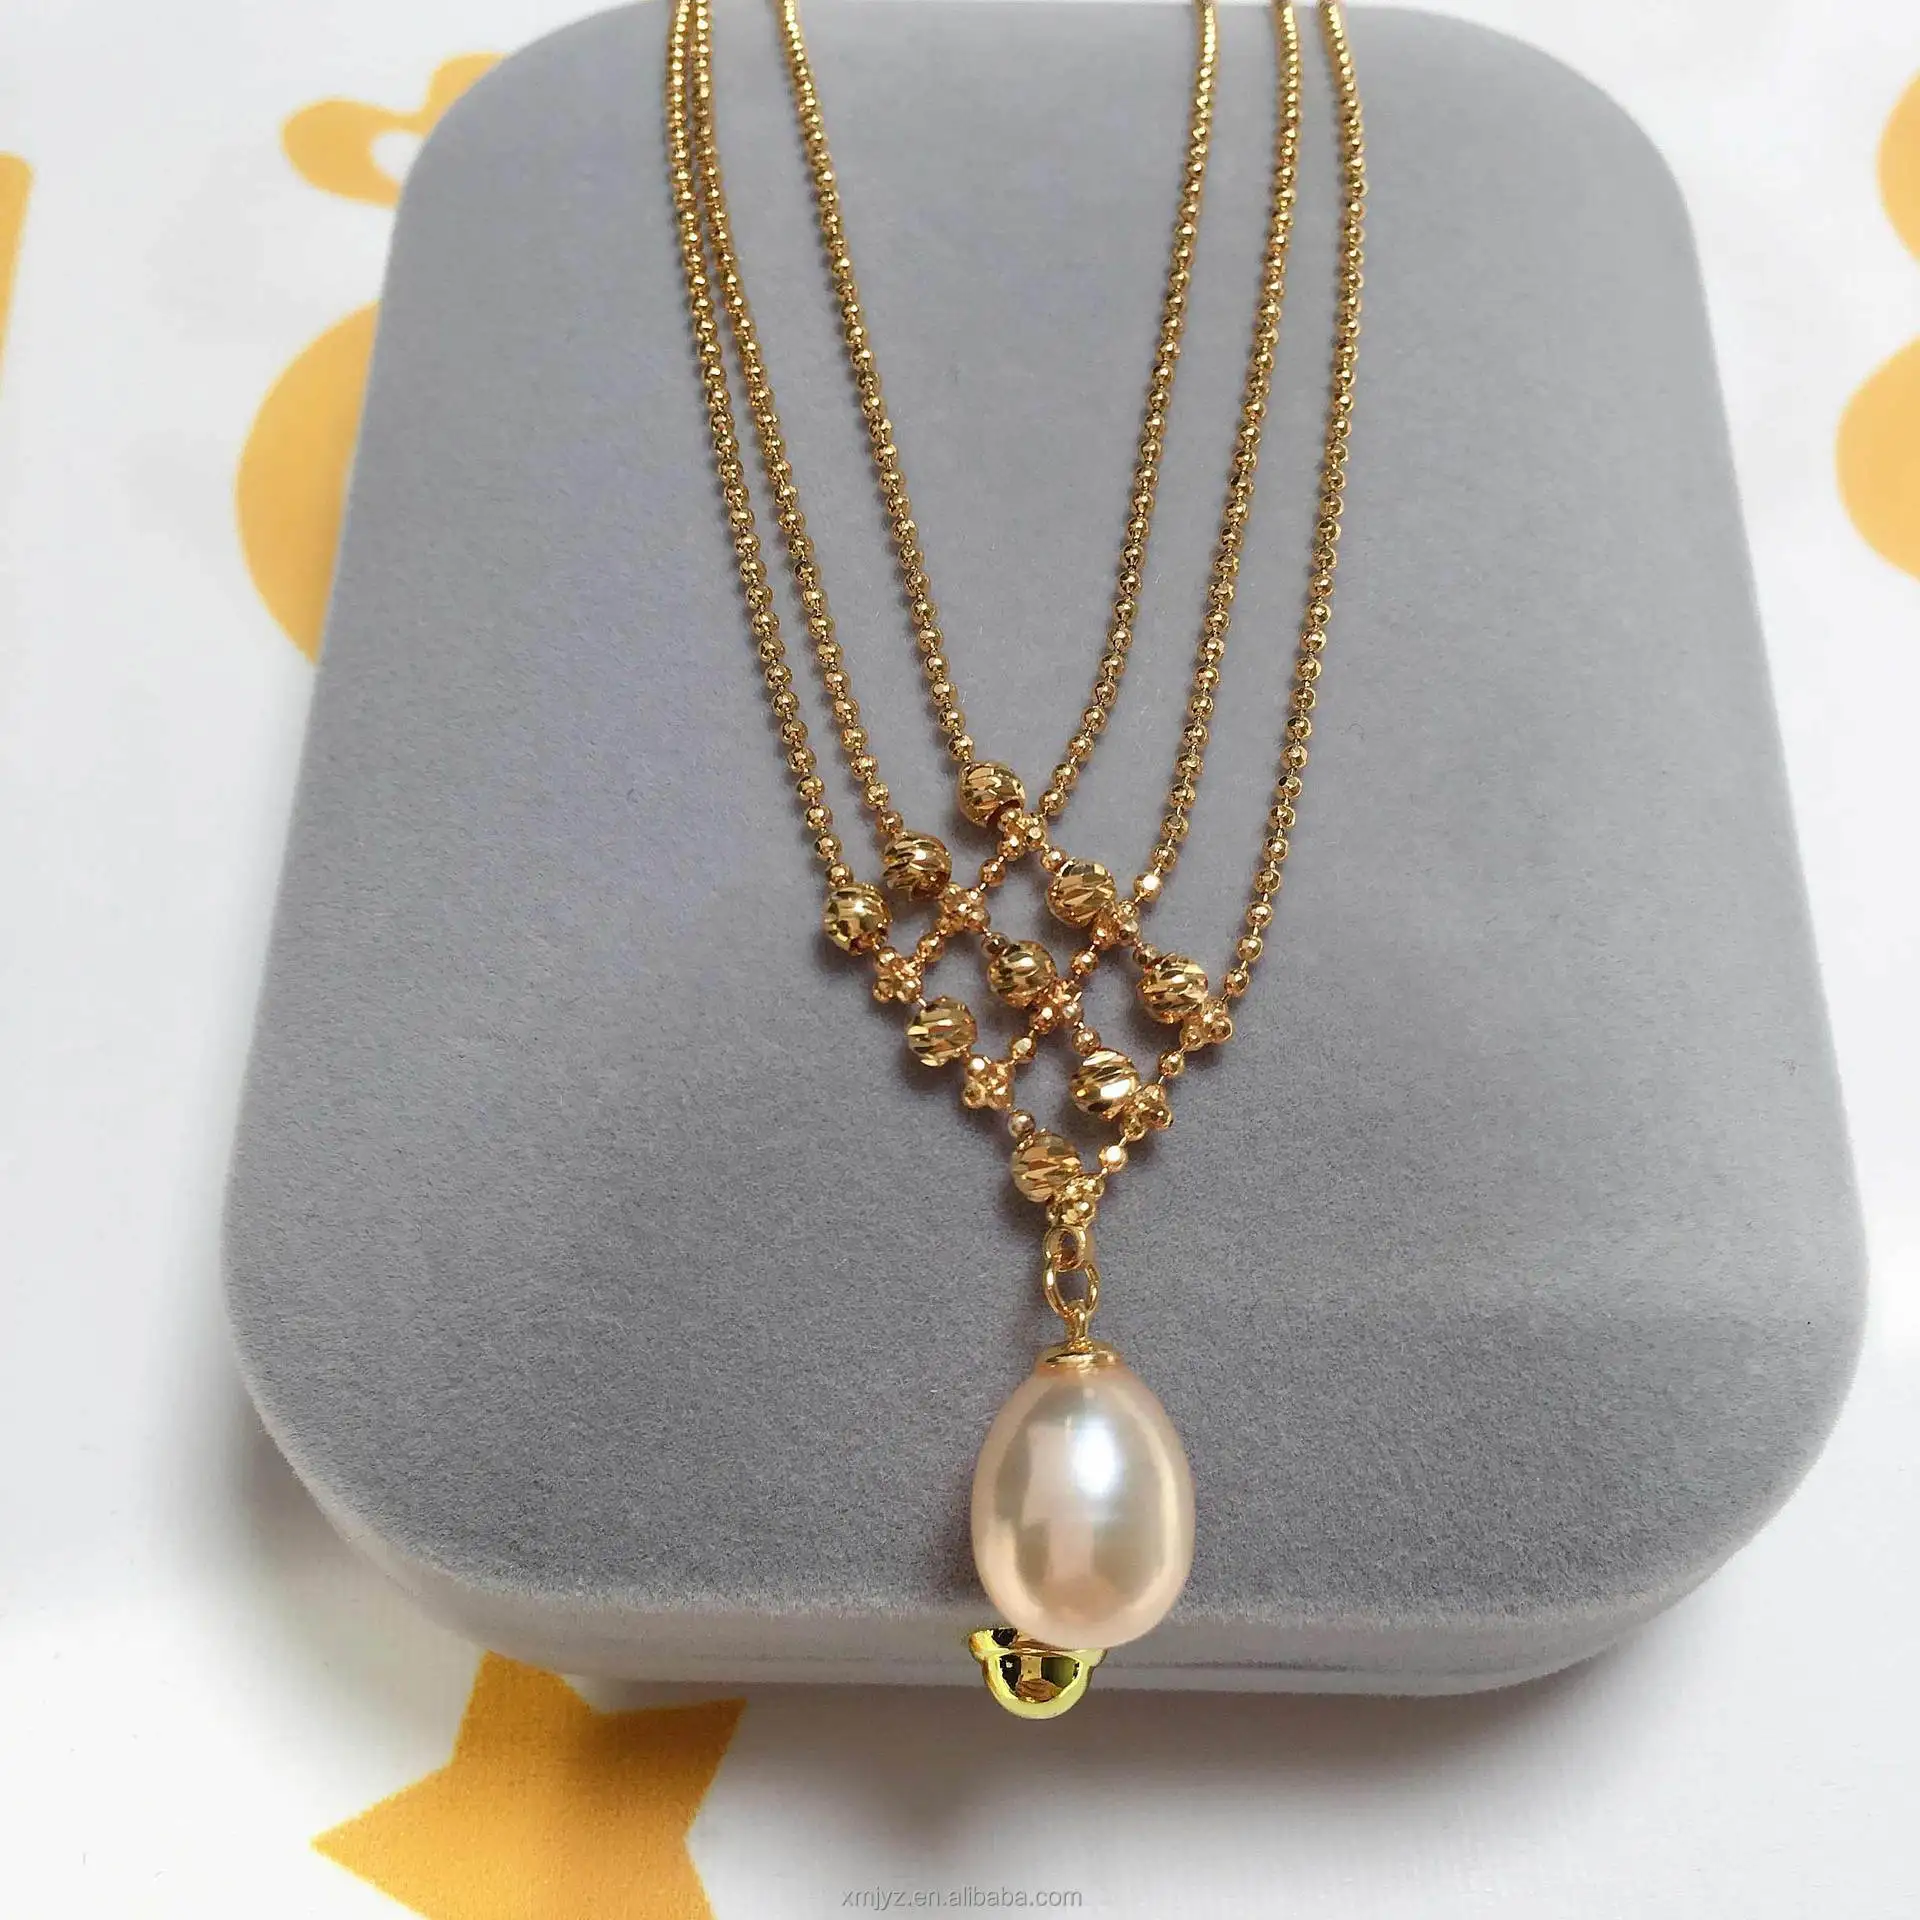 

Certified New Quality Craft Multi Layer Bead Chain Natural Freshwater Pearl Pendant Three Row Chain 18K Gold Plated